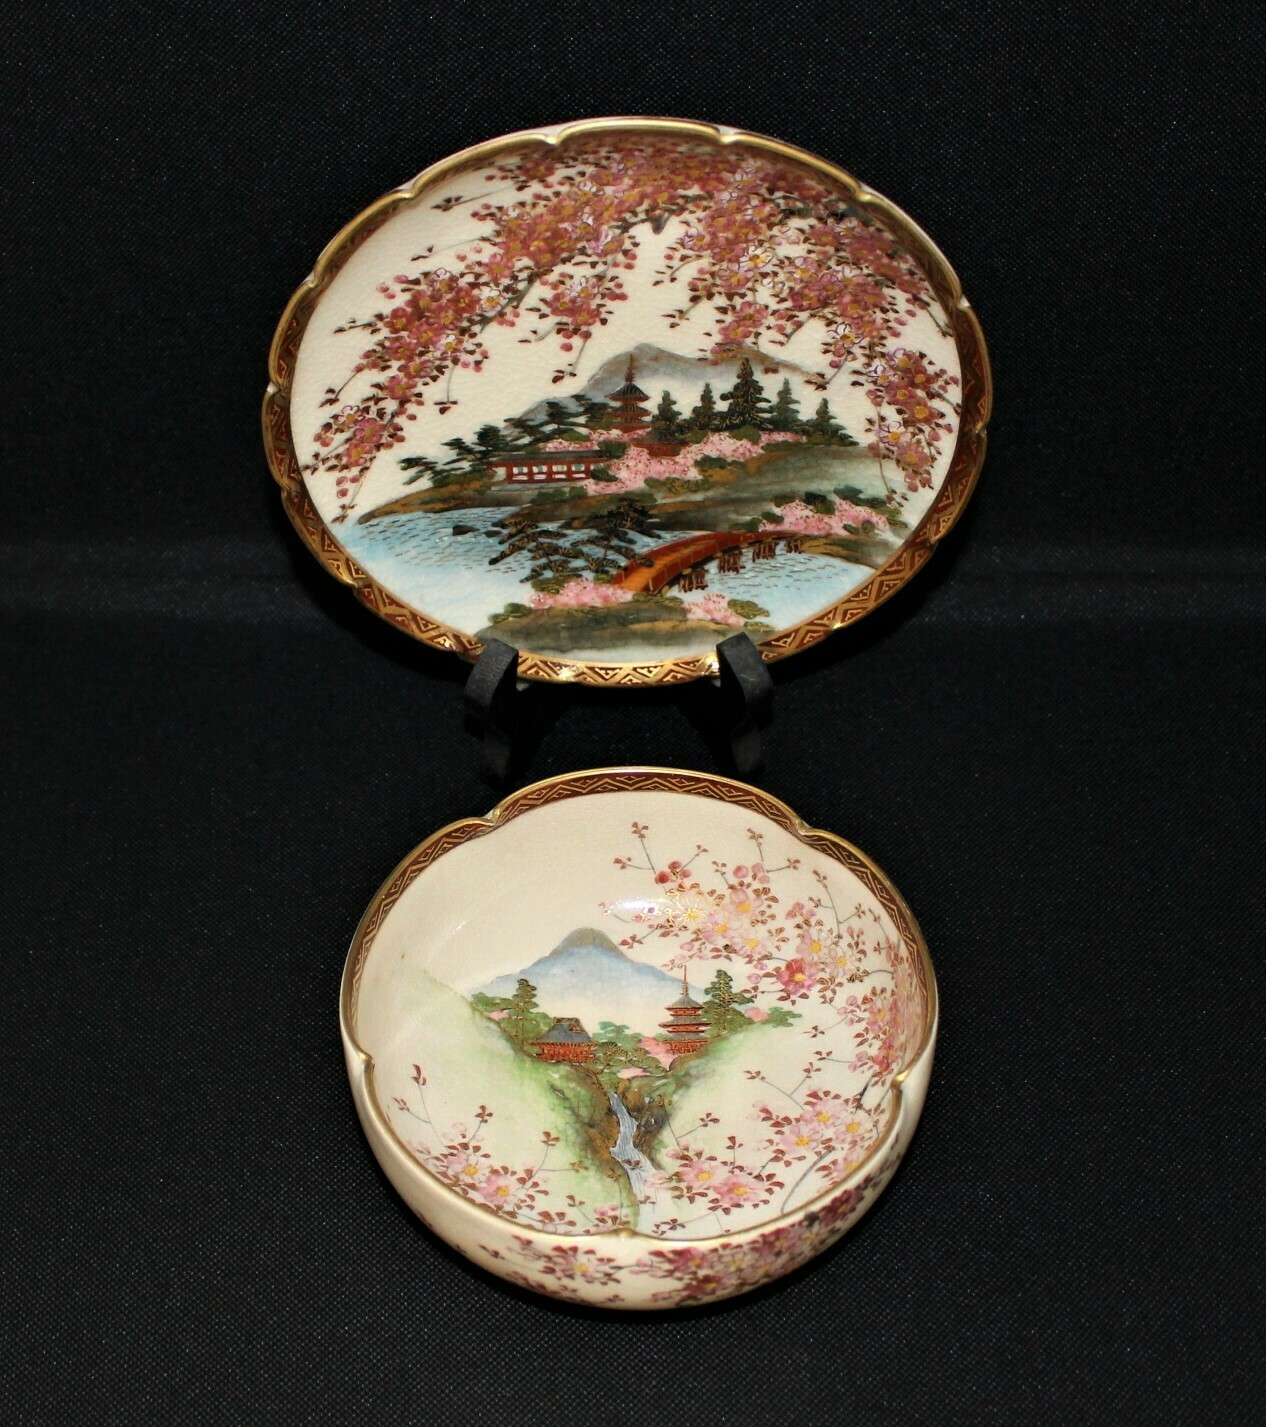 Japanese Satsuma Hand-Painted Garden Waterfall Floral Scenery Lobed Bowl & Plate